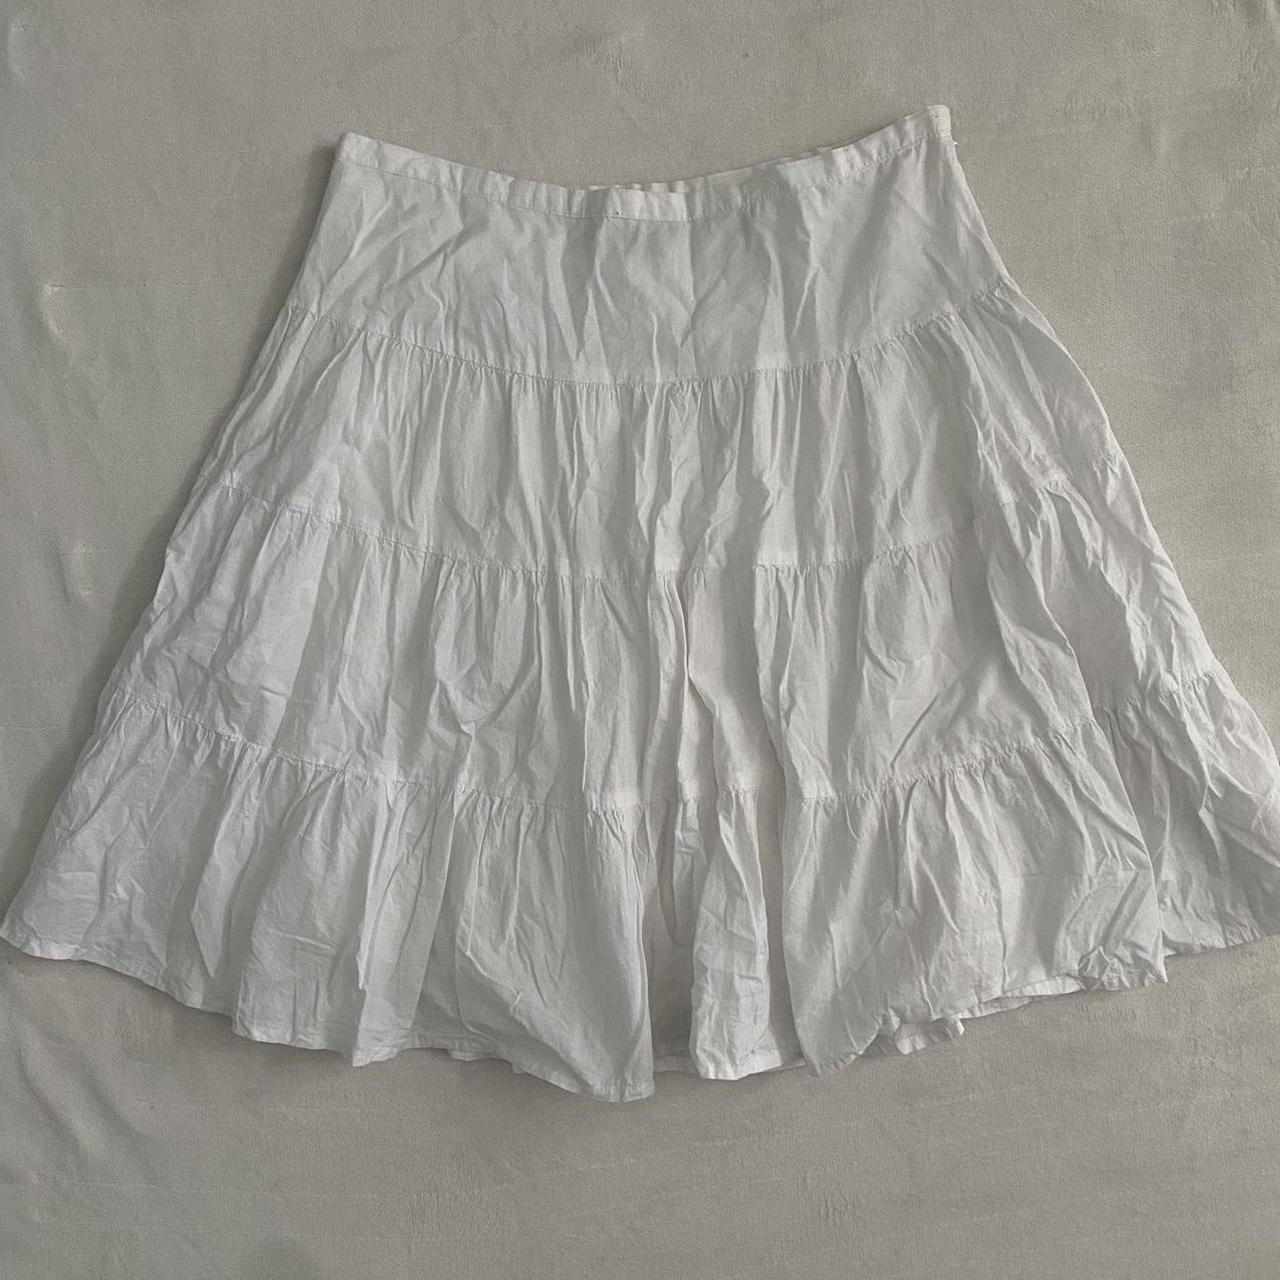 The most perfect vintage white tiered low rise midi... - Depop